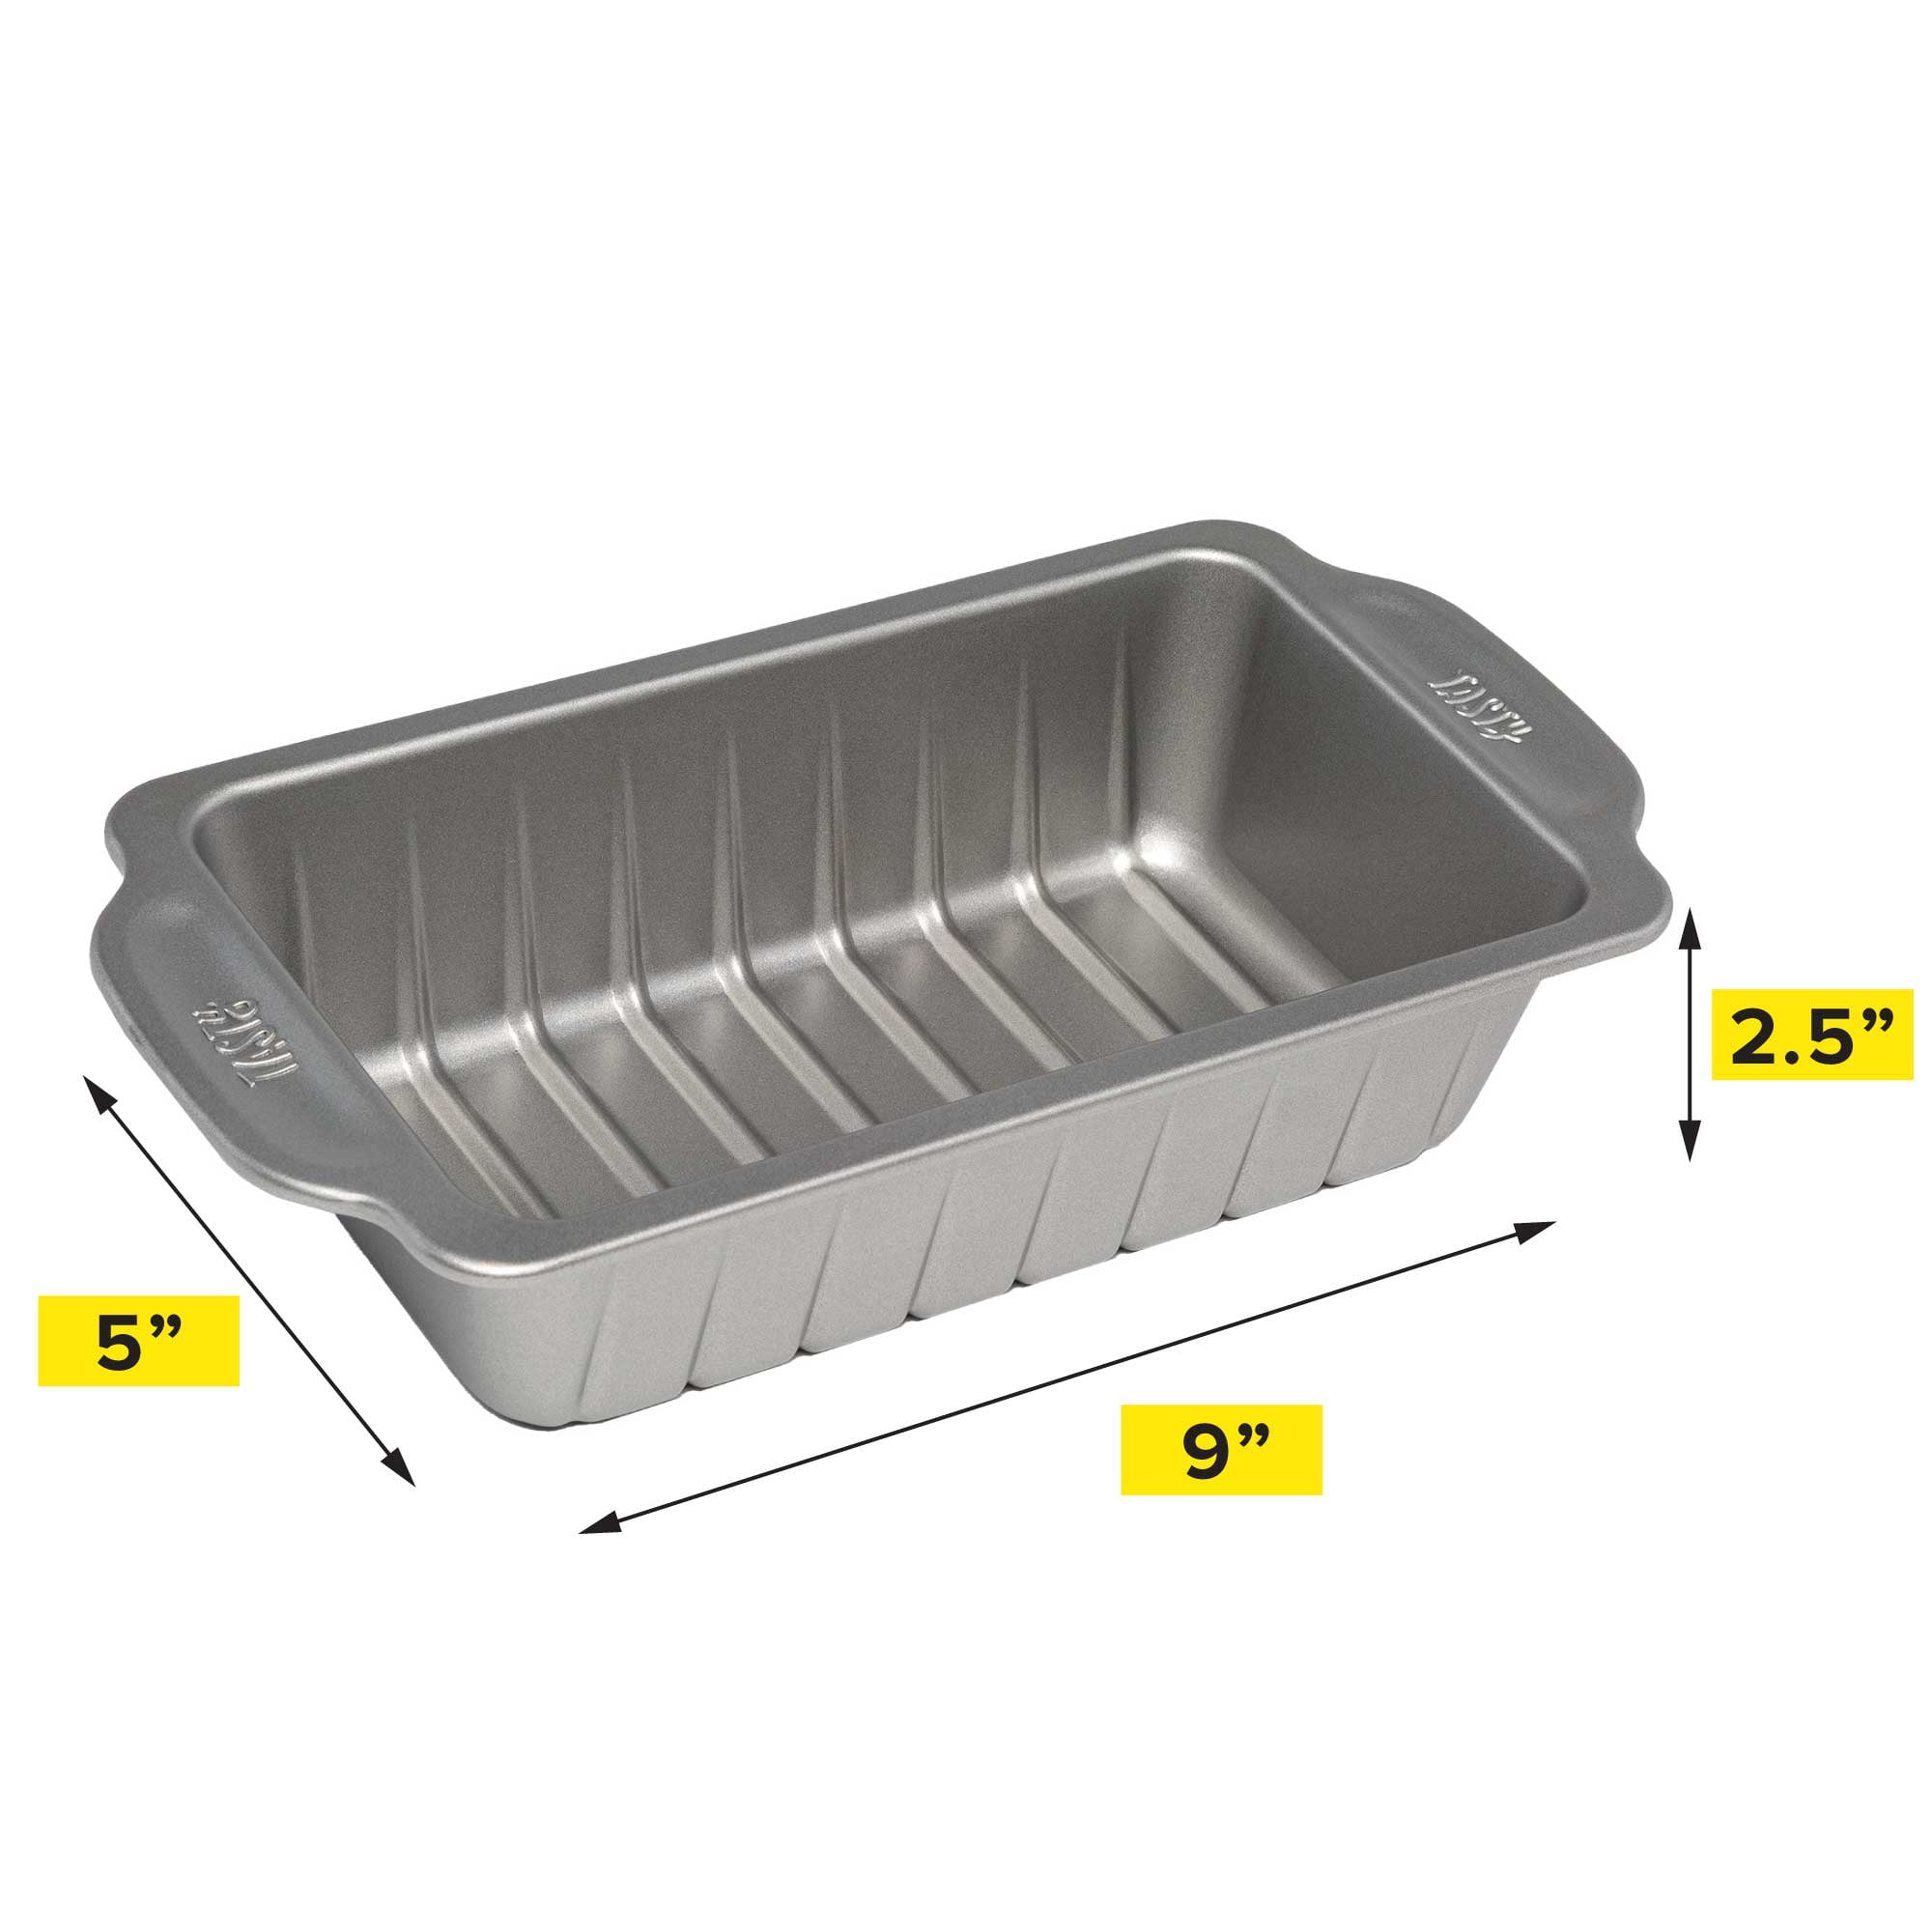 Tasty 2 Piece Carbon Steel Baking Set: 9x5 Loaf Pan and 9